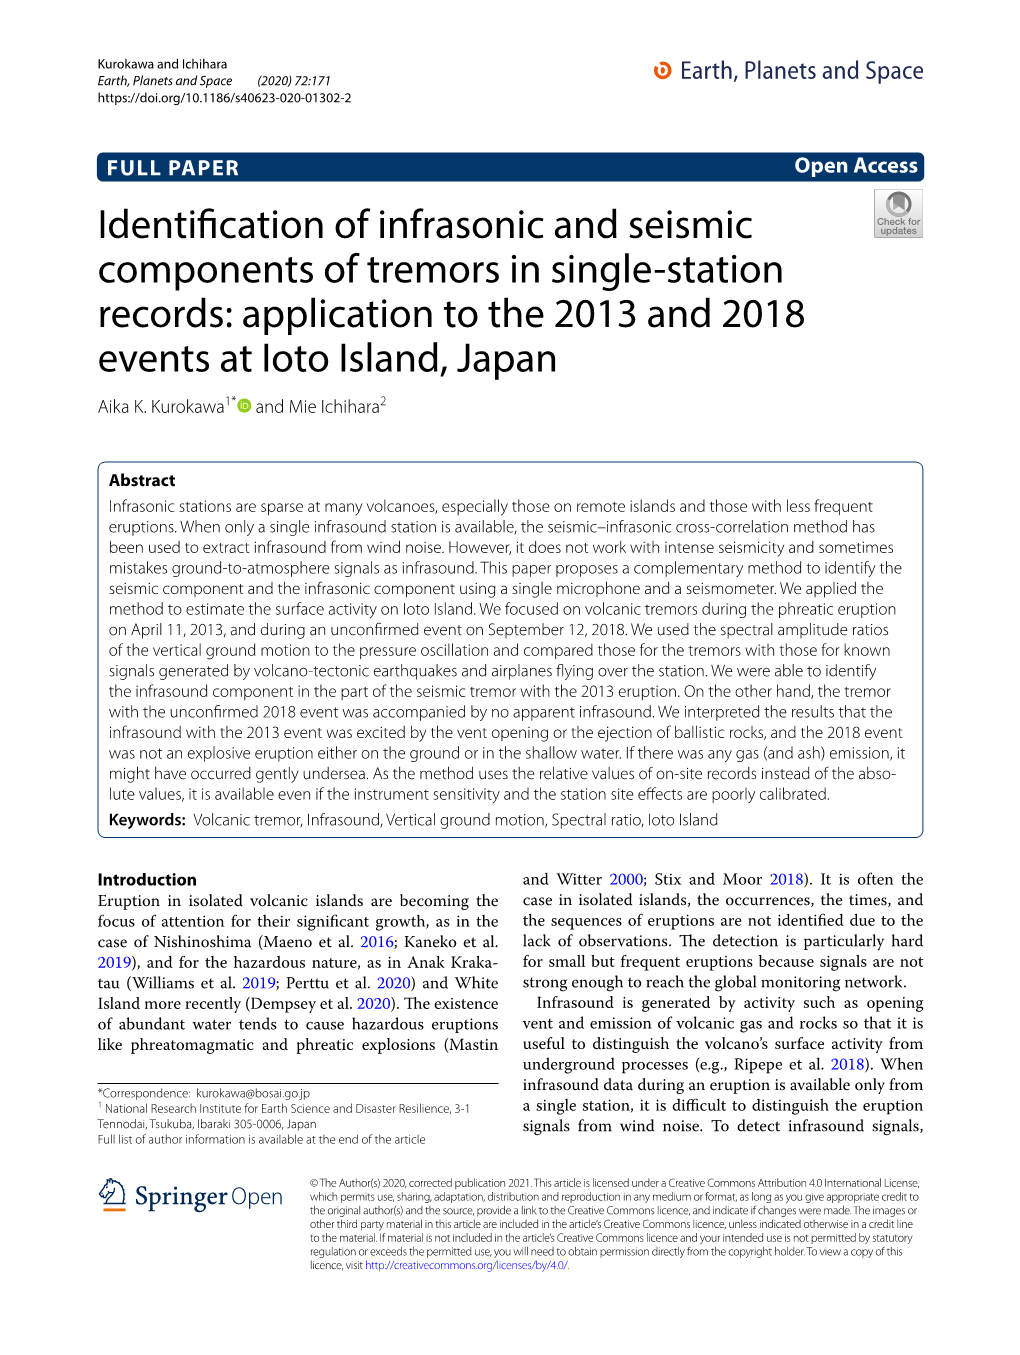 Identification of Infrasonic and Seismic Components of Tremors in Single